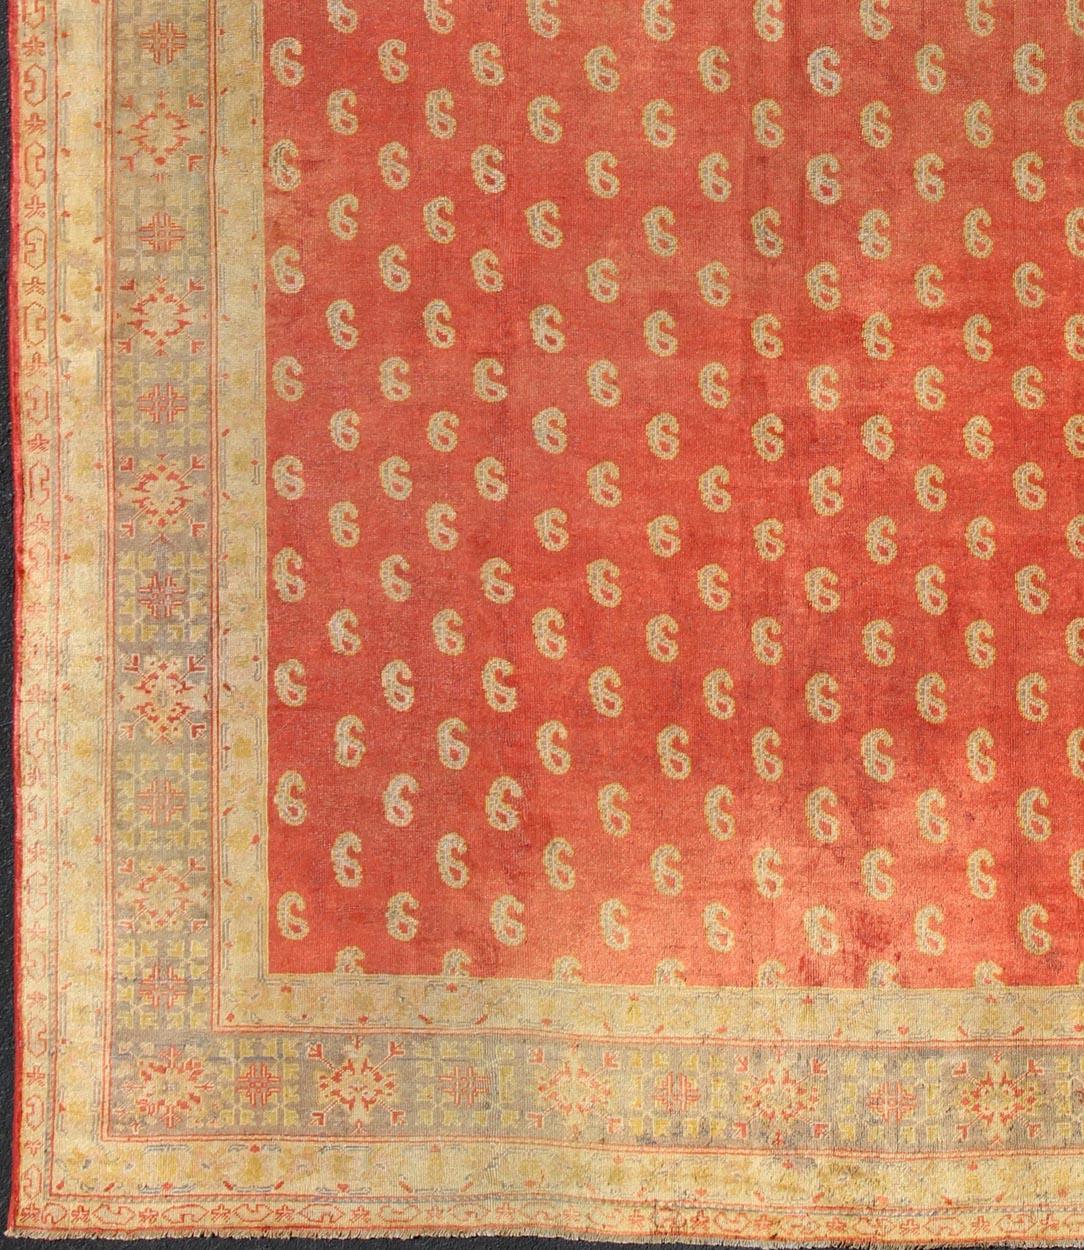 Antique Turkish Oushak rug with all-over design with red, light green and gold. Turkish Oushak antique carpet in red. Keivan Woven Arts /  rug 17-0801, country of origin / type: Turkey / Oushak, circa 1920. 
Measures: 10'7 x 15'.
This Oushak rug